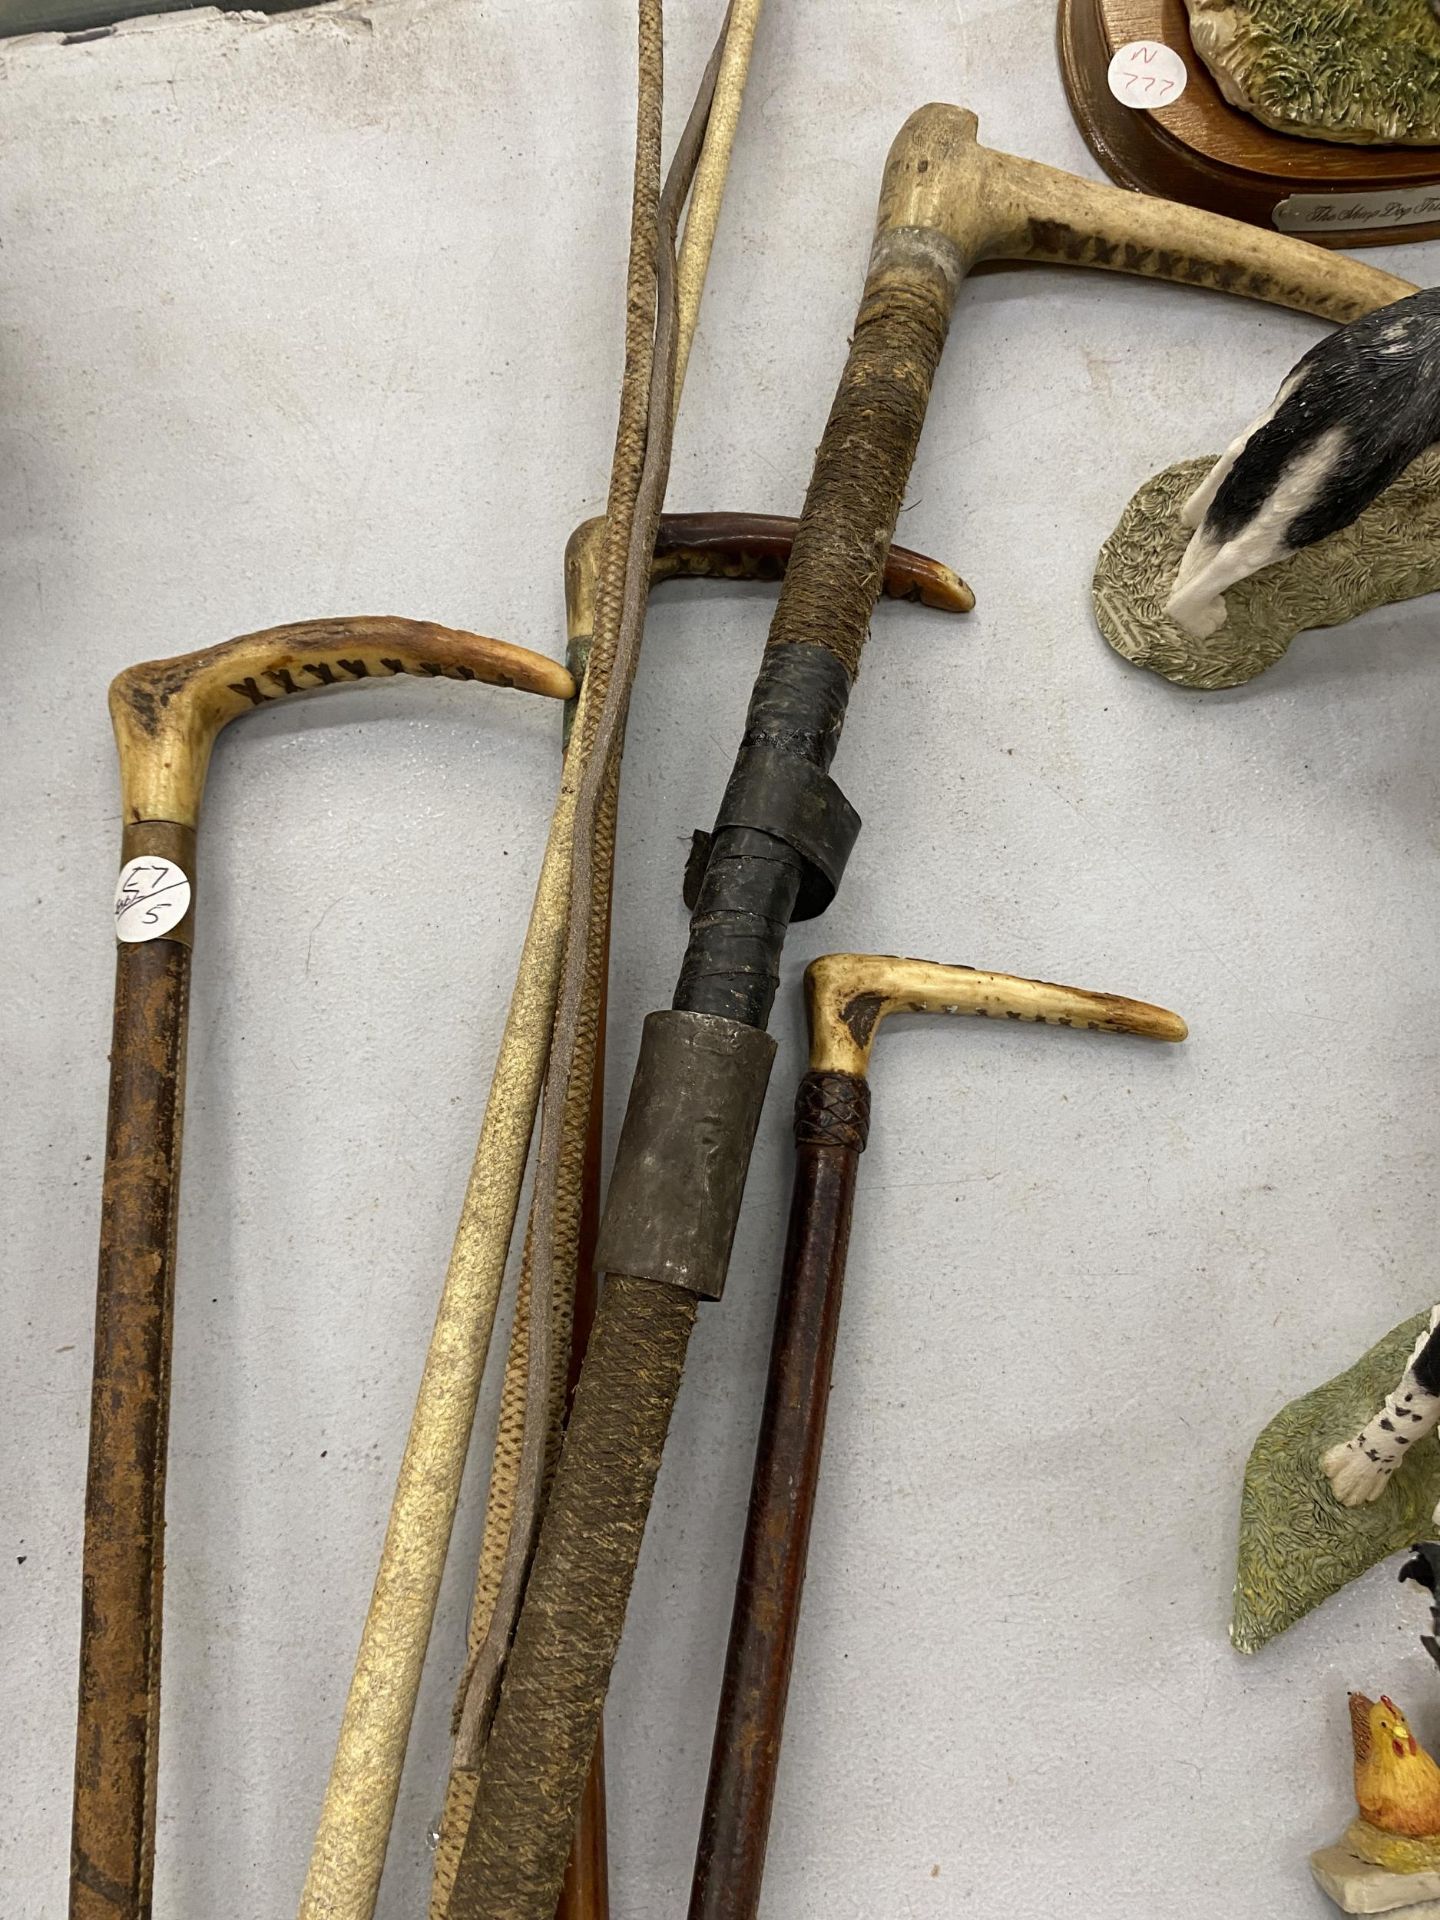 SIX VINTAGE RIDING CROPS TO INCLUDE HORN HANDLED EXAMPLES - Image 2 of 2